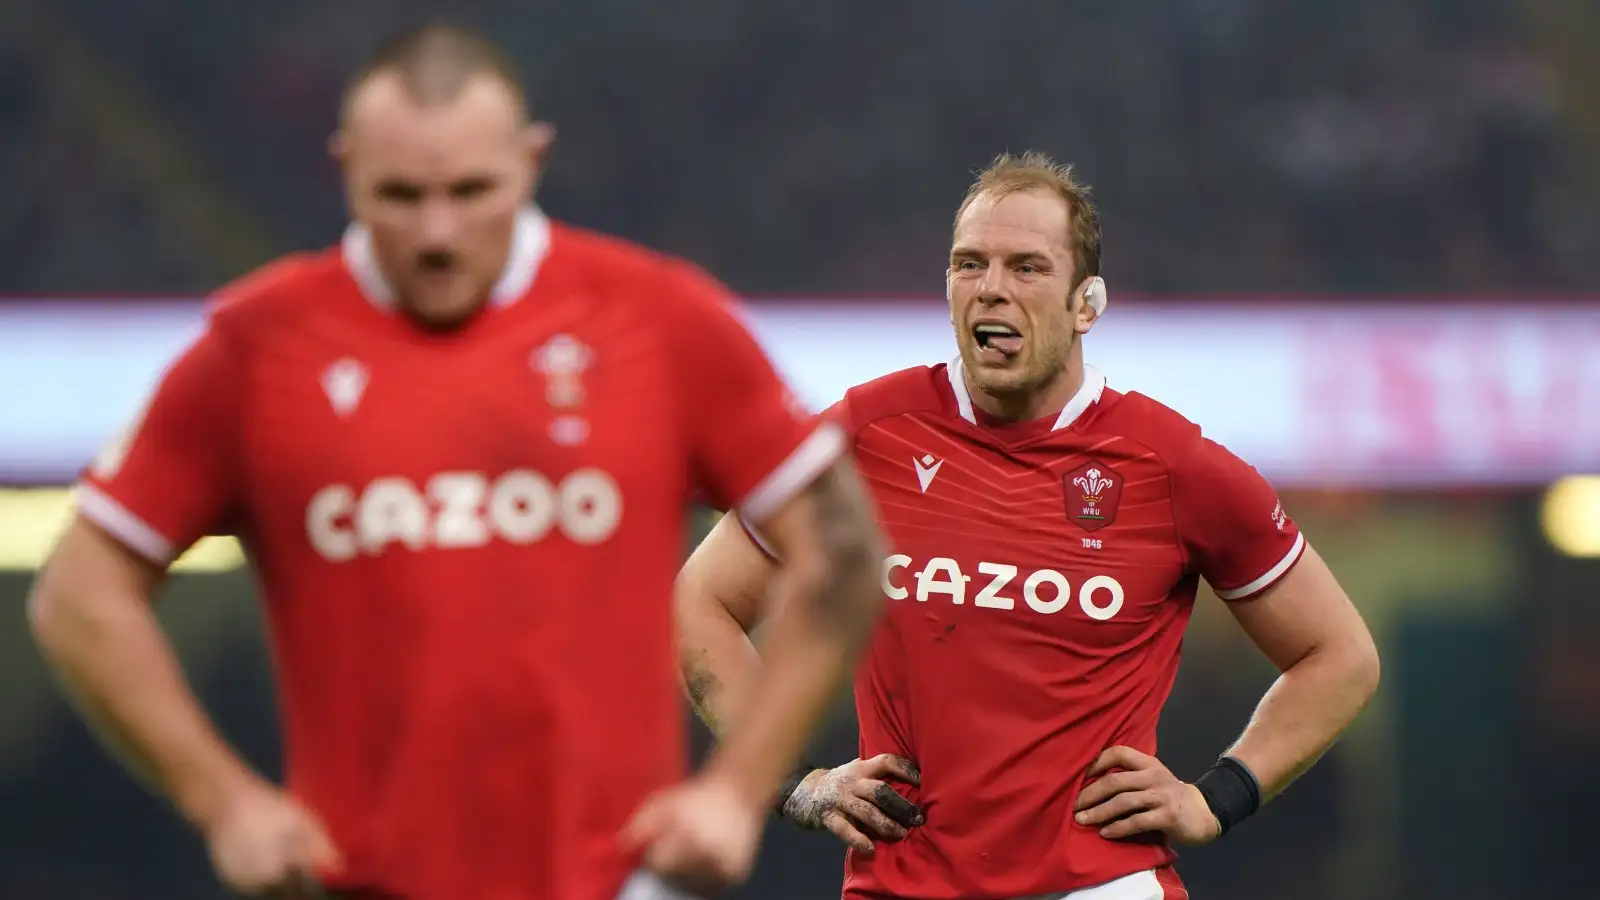 Alun Wyn Jones will be available for selection for Wales’ Six Nations clash with Scotland at Murrayfield. Head coach Warren Gatland initially ruled the most capped Test player of all time out of the clash after Jones took a head knock against Ireland, but he has now been cleared to face the Scots.